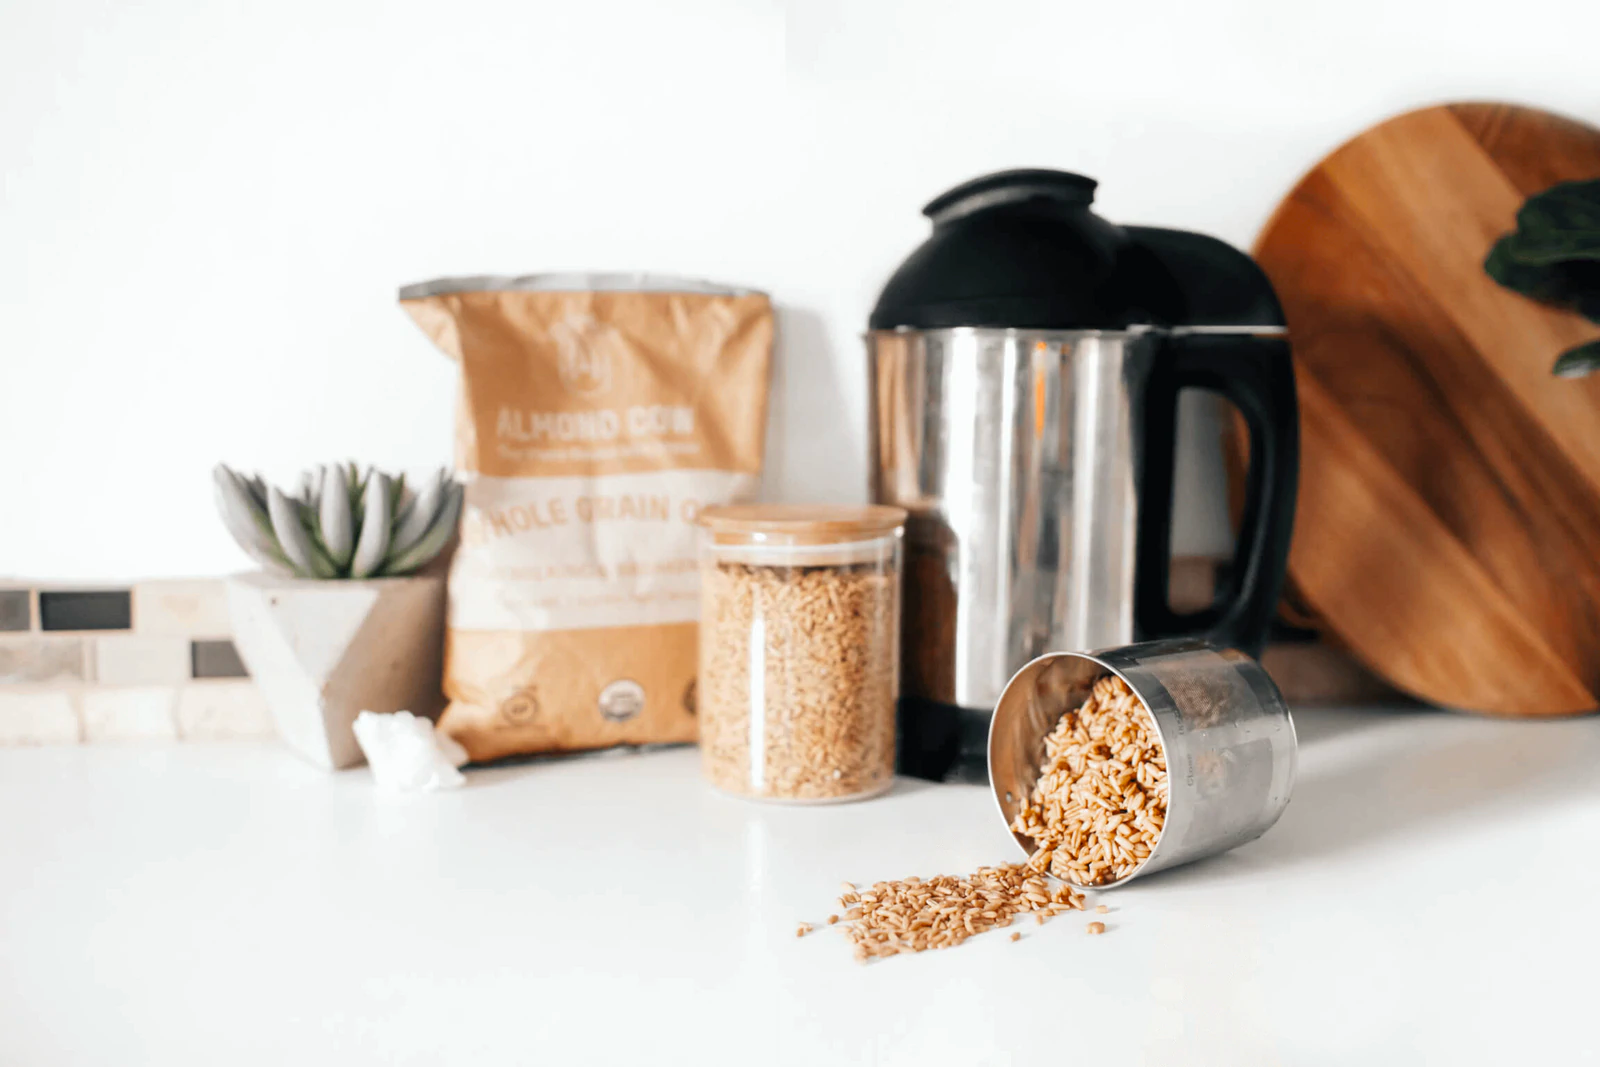 Guide to making oat milk at home with nutrition facts and benefits